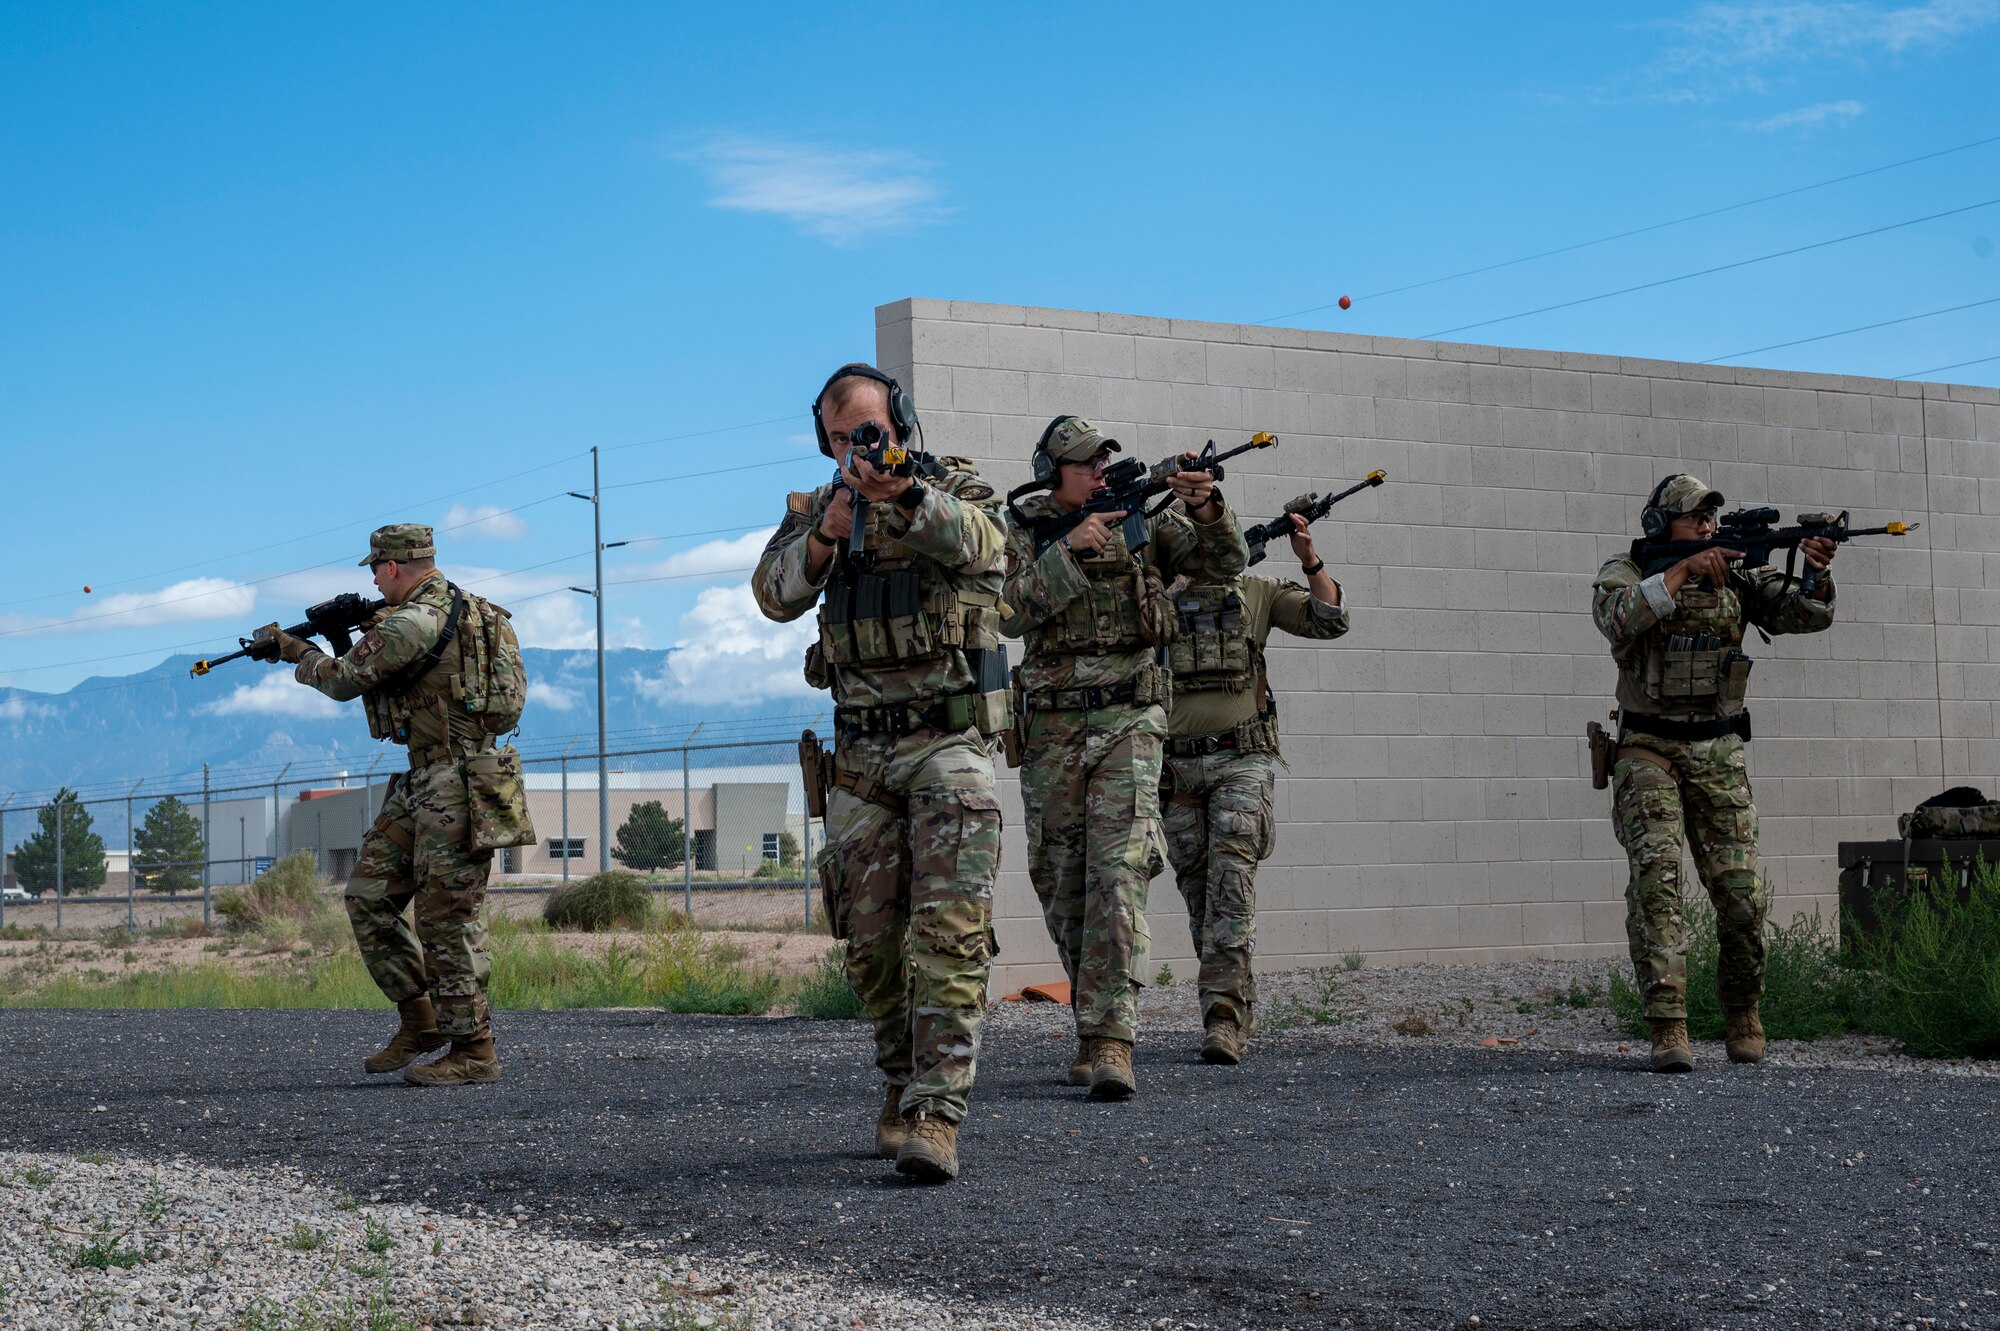 SFS team members approach a building in formation